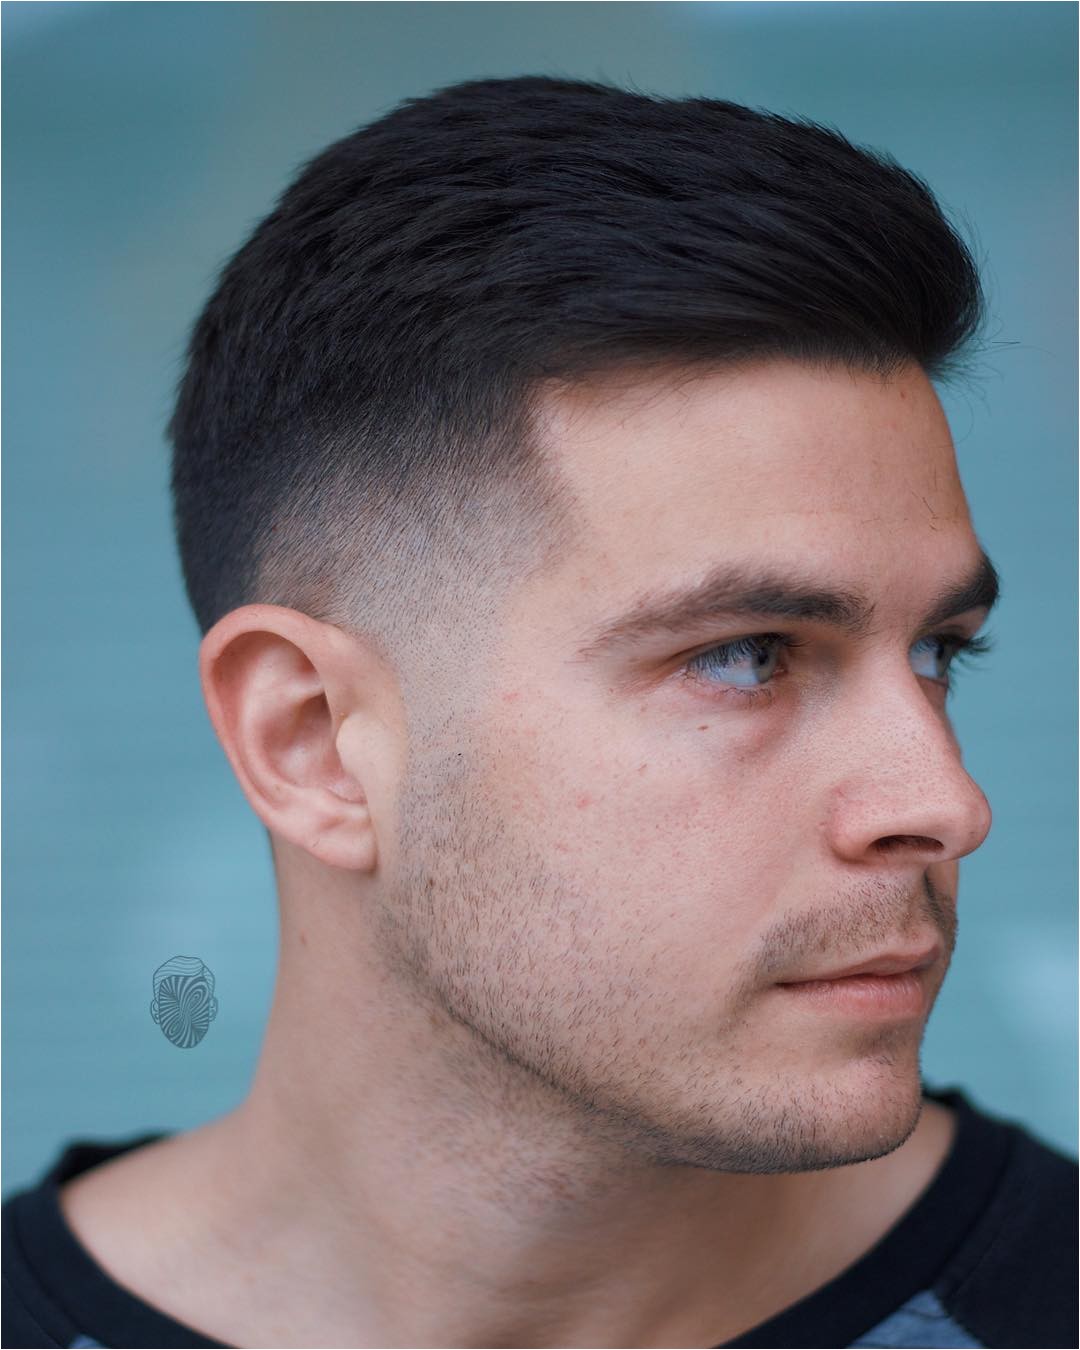 Pics Of Mens Short Hairstyles Short Hairstyles for Men 2018